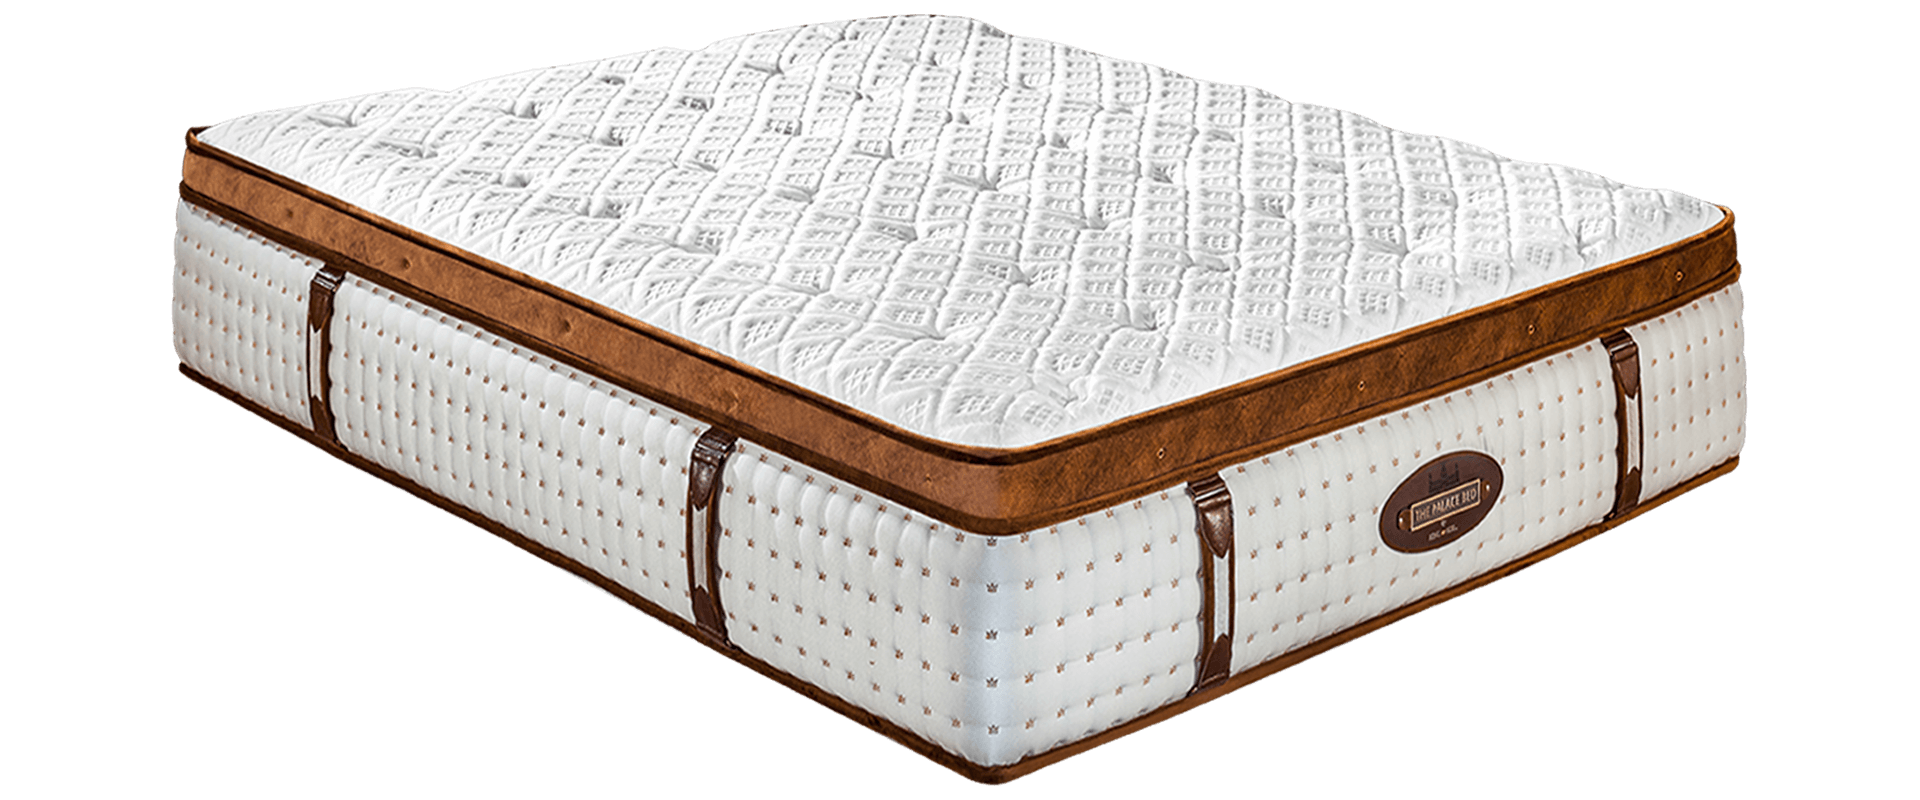 most expensive mattress in india price